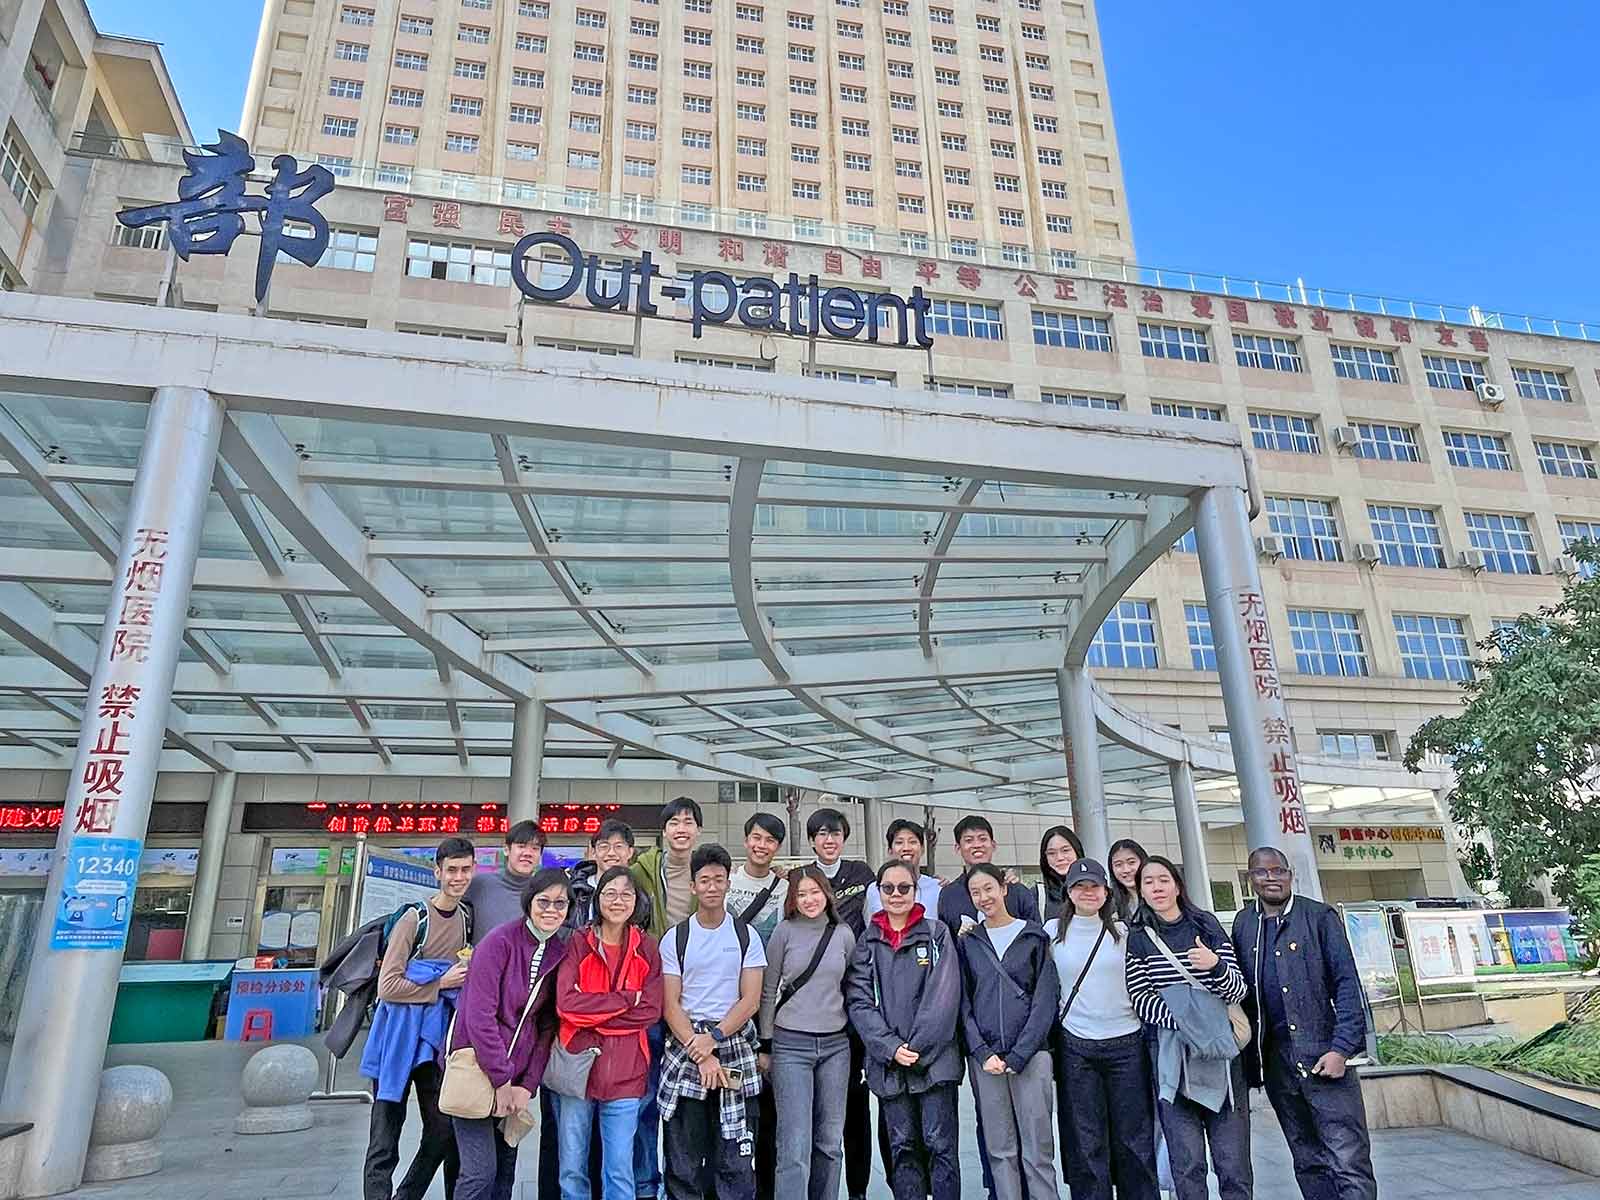 Various Chinese Asians standing outside a hospital entrance that has a sign on-top reading Outpatient.